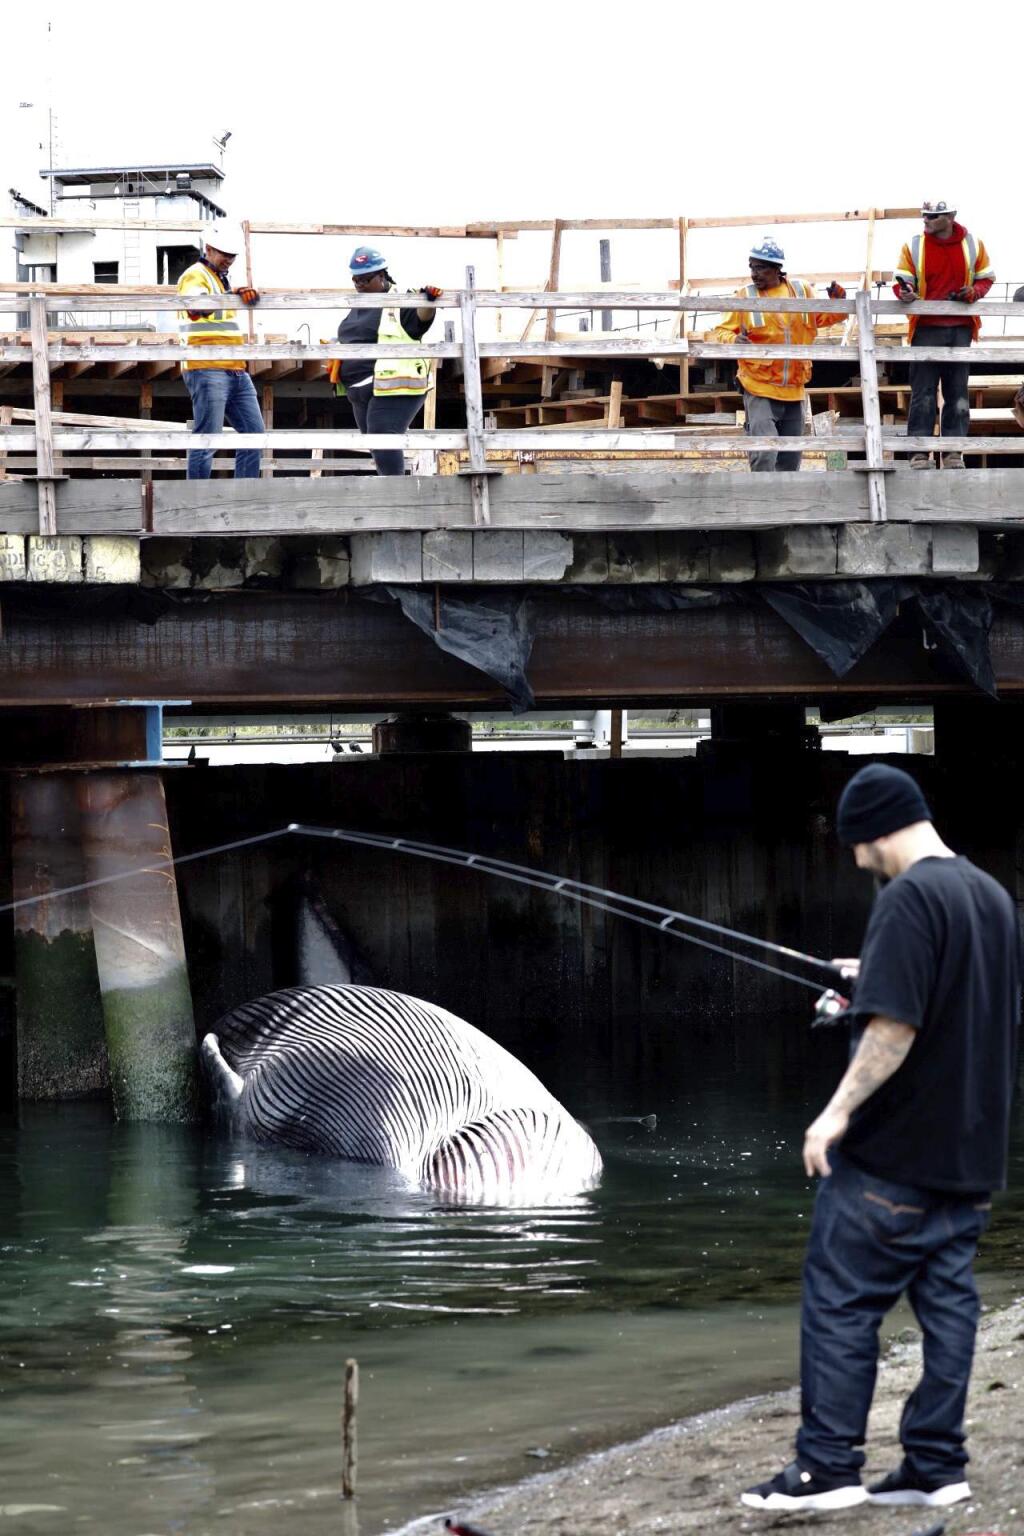 Silvester Silva of Oakland fishes in the Oakland estuary, near the carcass of a baby whale which washed up at the construction of the Embarcadero Road bridge in Oakland, Calif., on Friday, May 18, 2018. Marine experts say a dead whale was found partially submerged under a bridge in the estuary near Oakland's Jack London Square.(Laura A. Oda/San Jose Mercury News via AP)